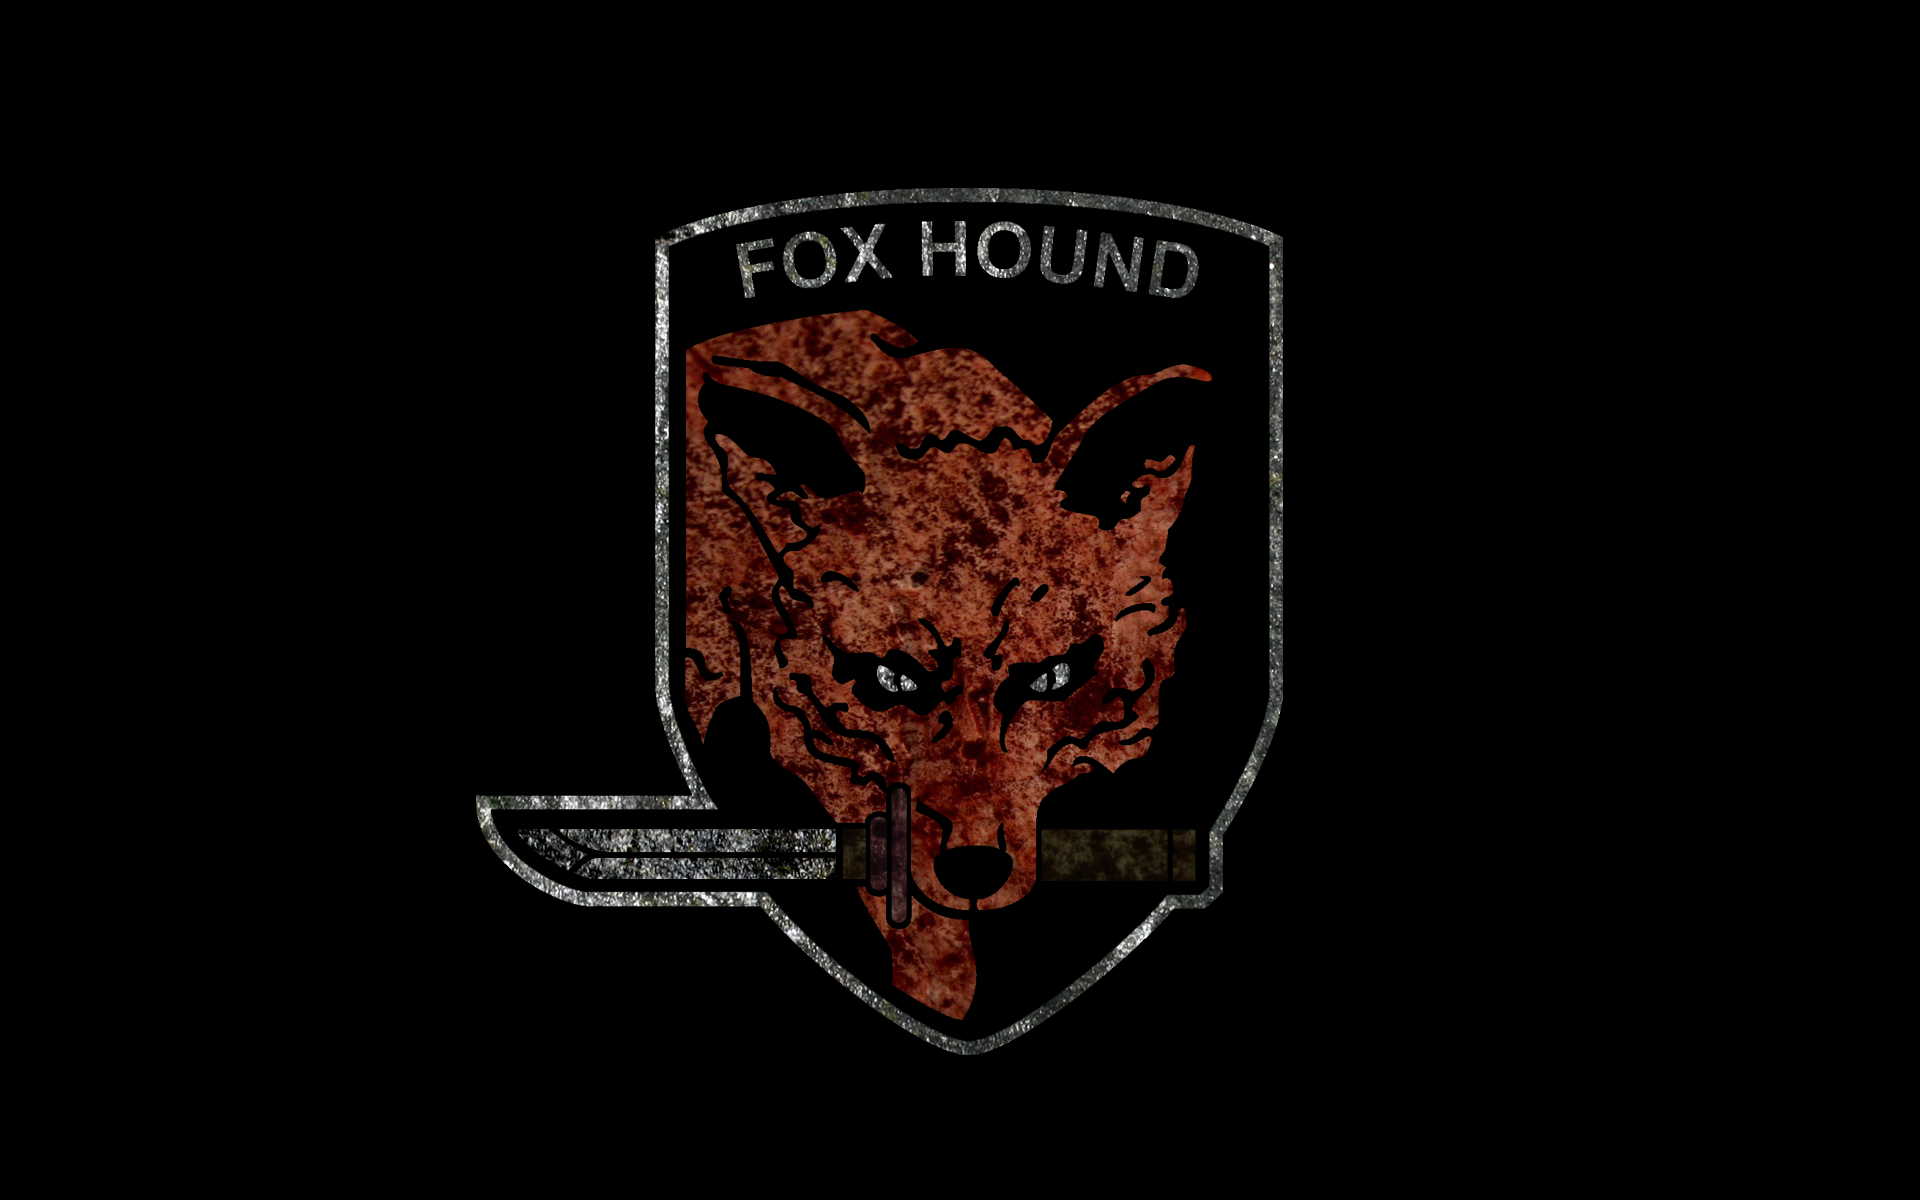 Metal Gear Solid Video Games Mgs Fox Hound With Resolutions